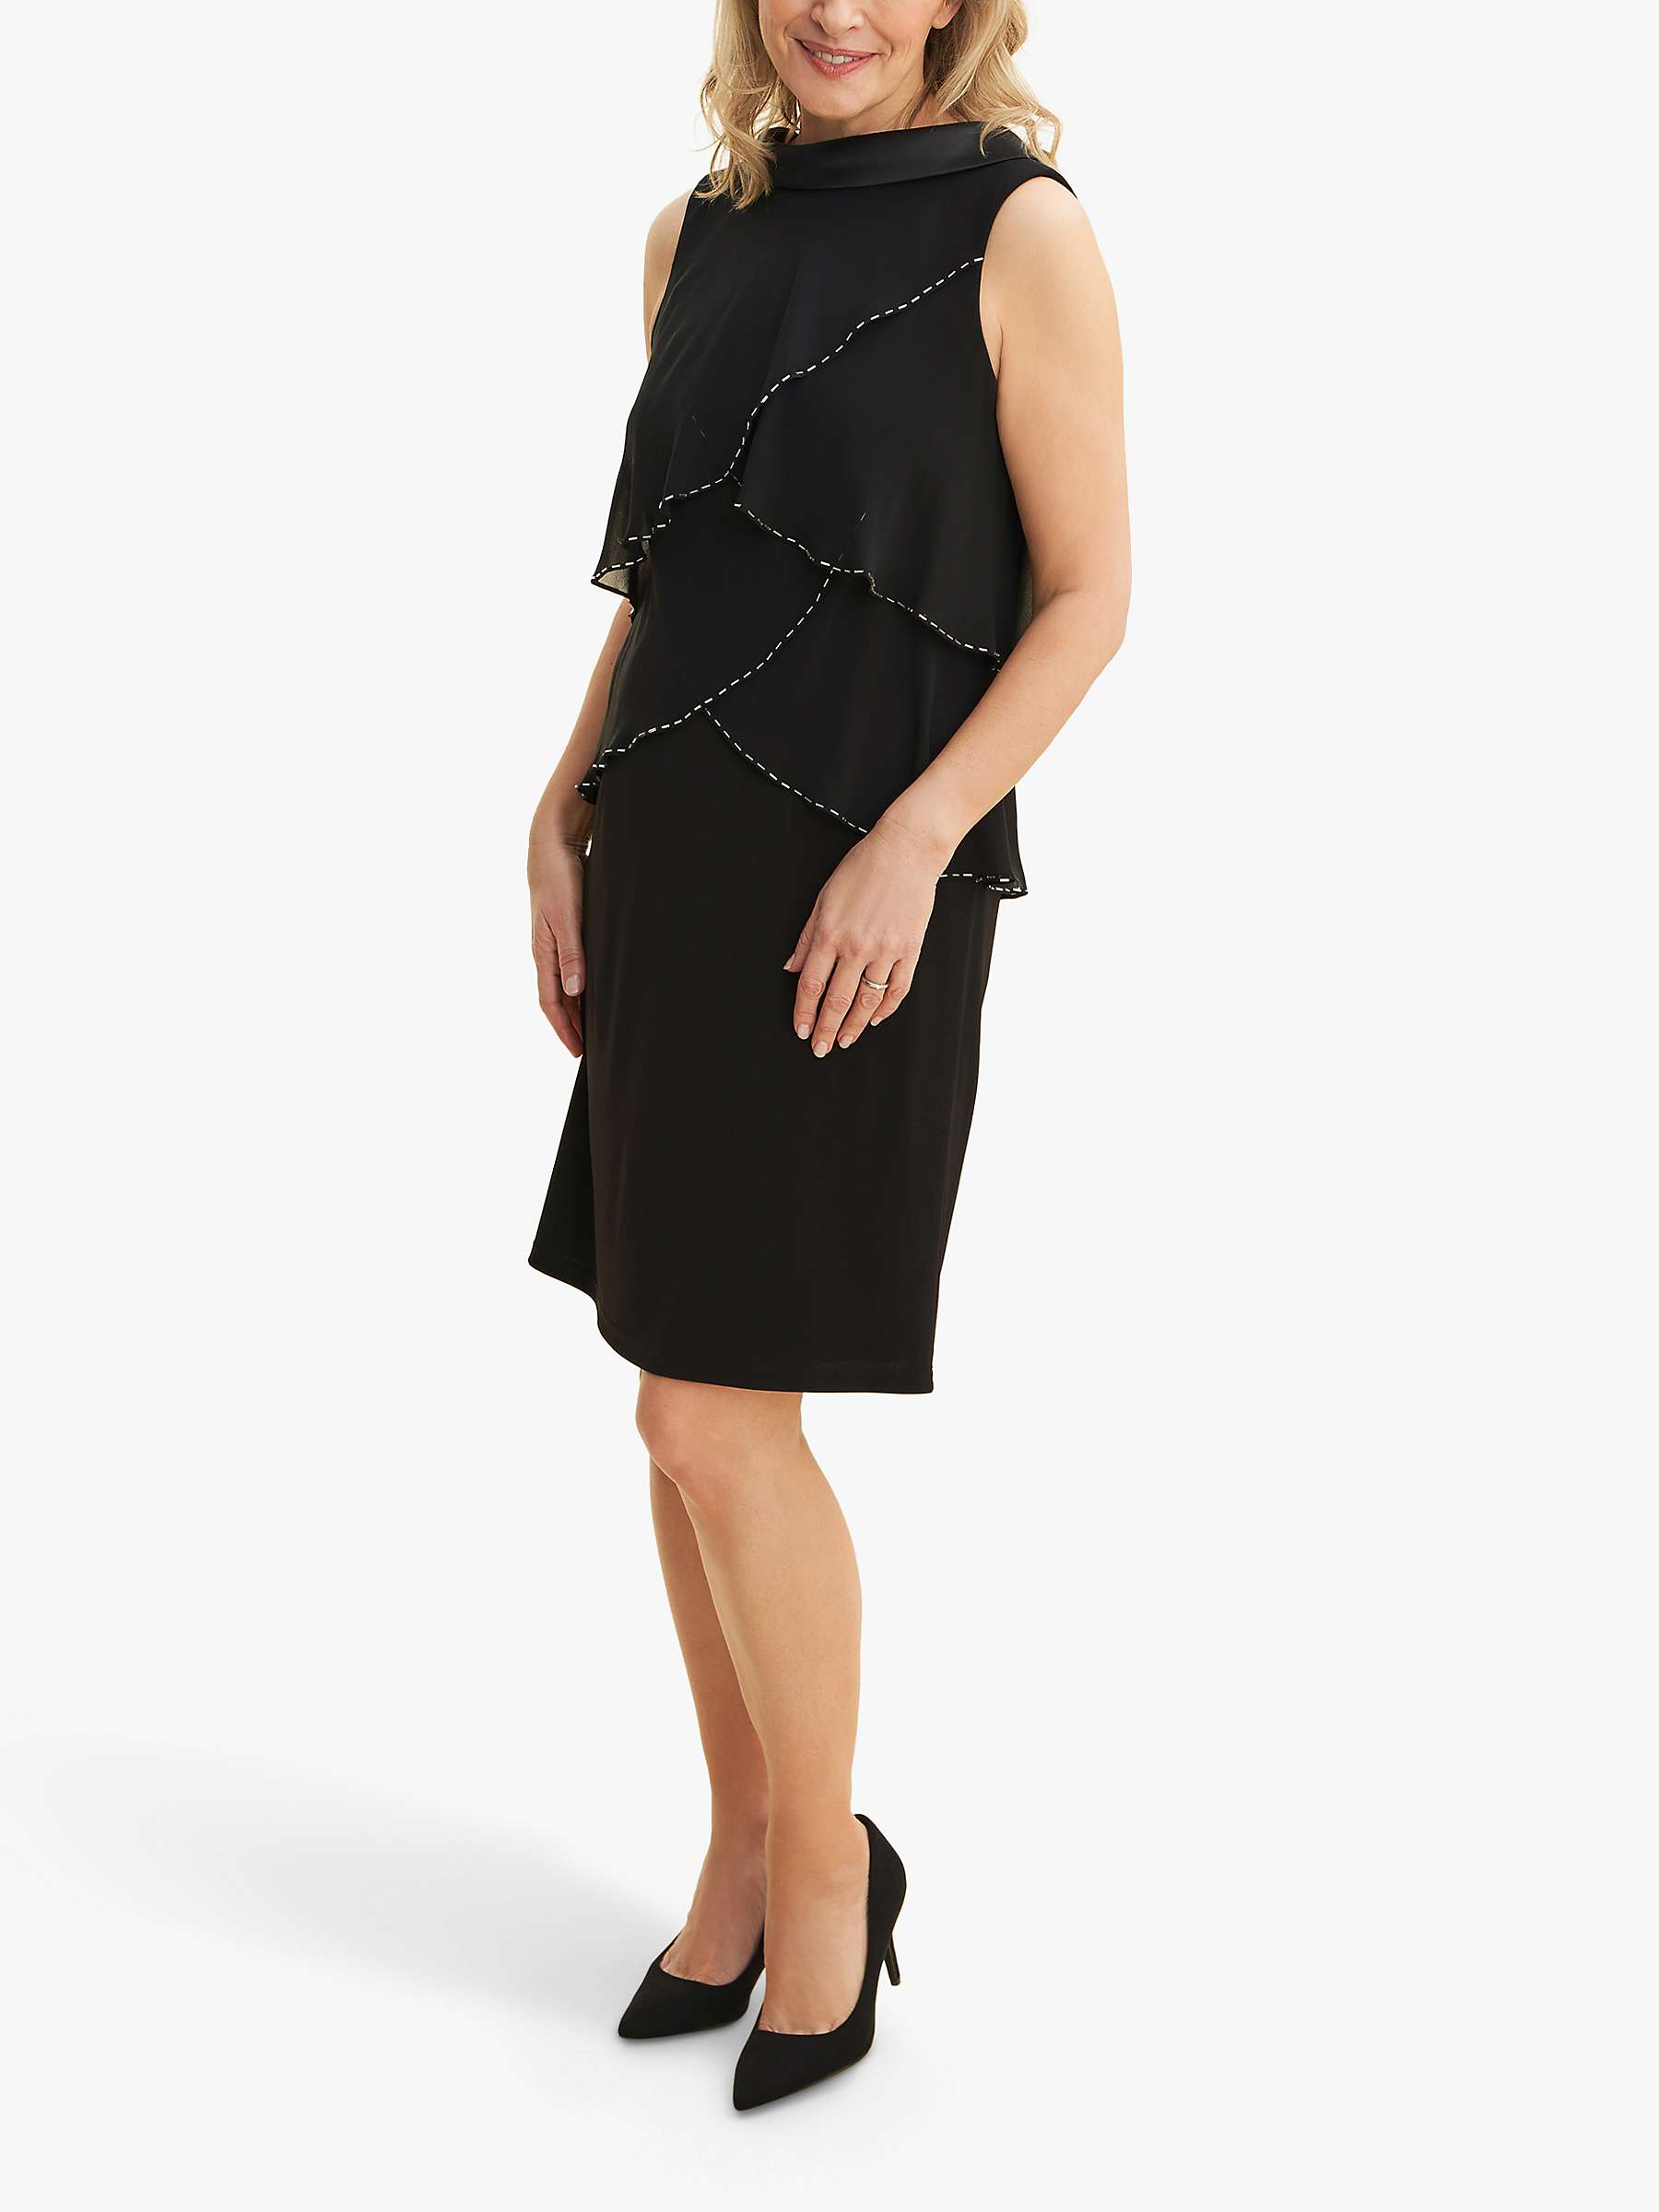 Buy Gina Bacconi Gerry Tiered Dress, Black Online at johnlewis.com